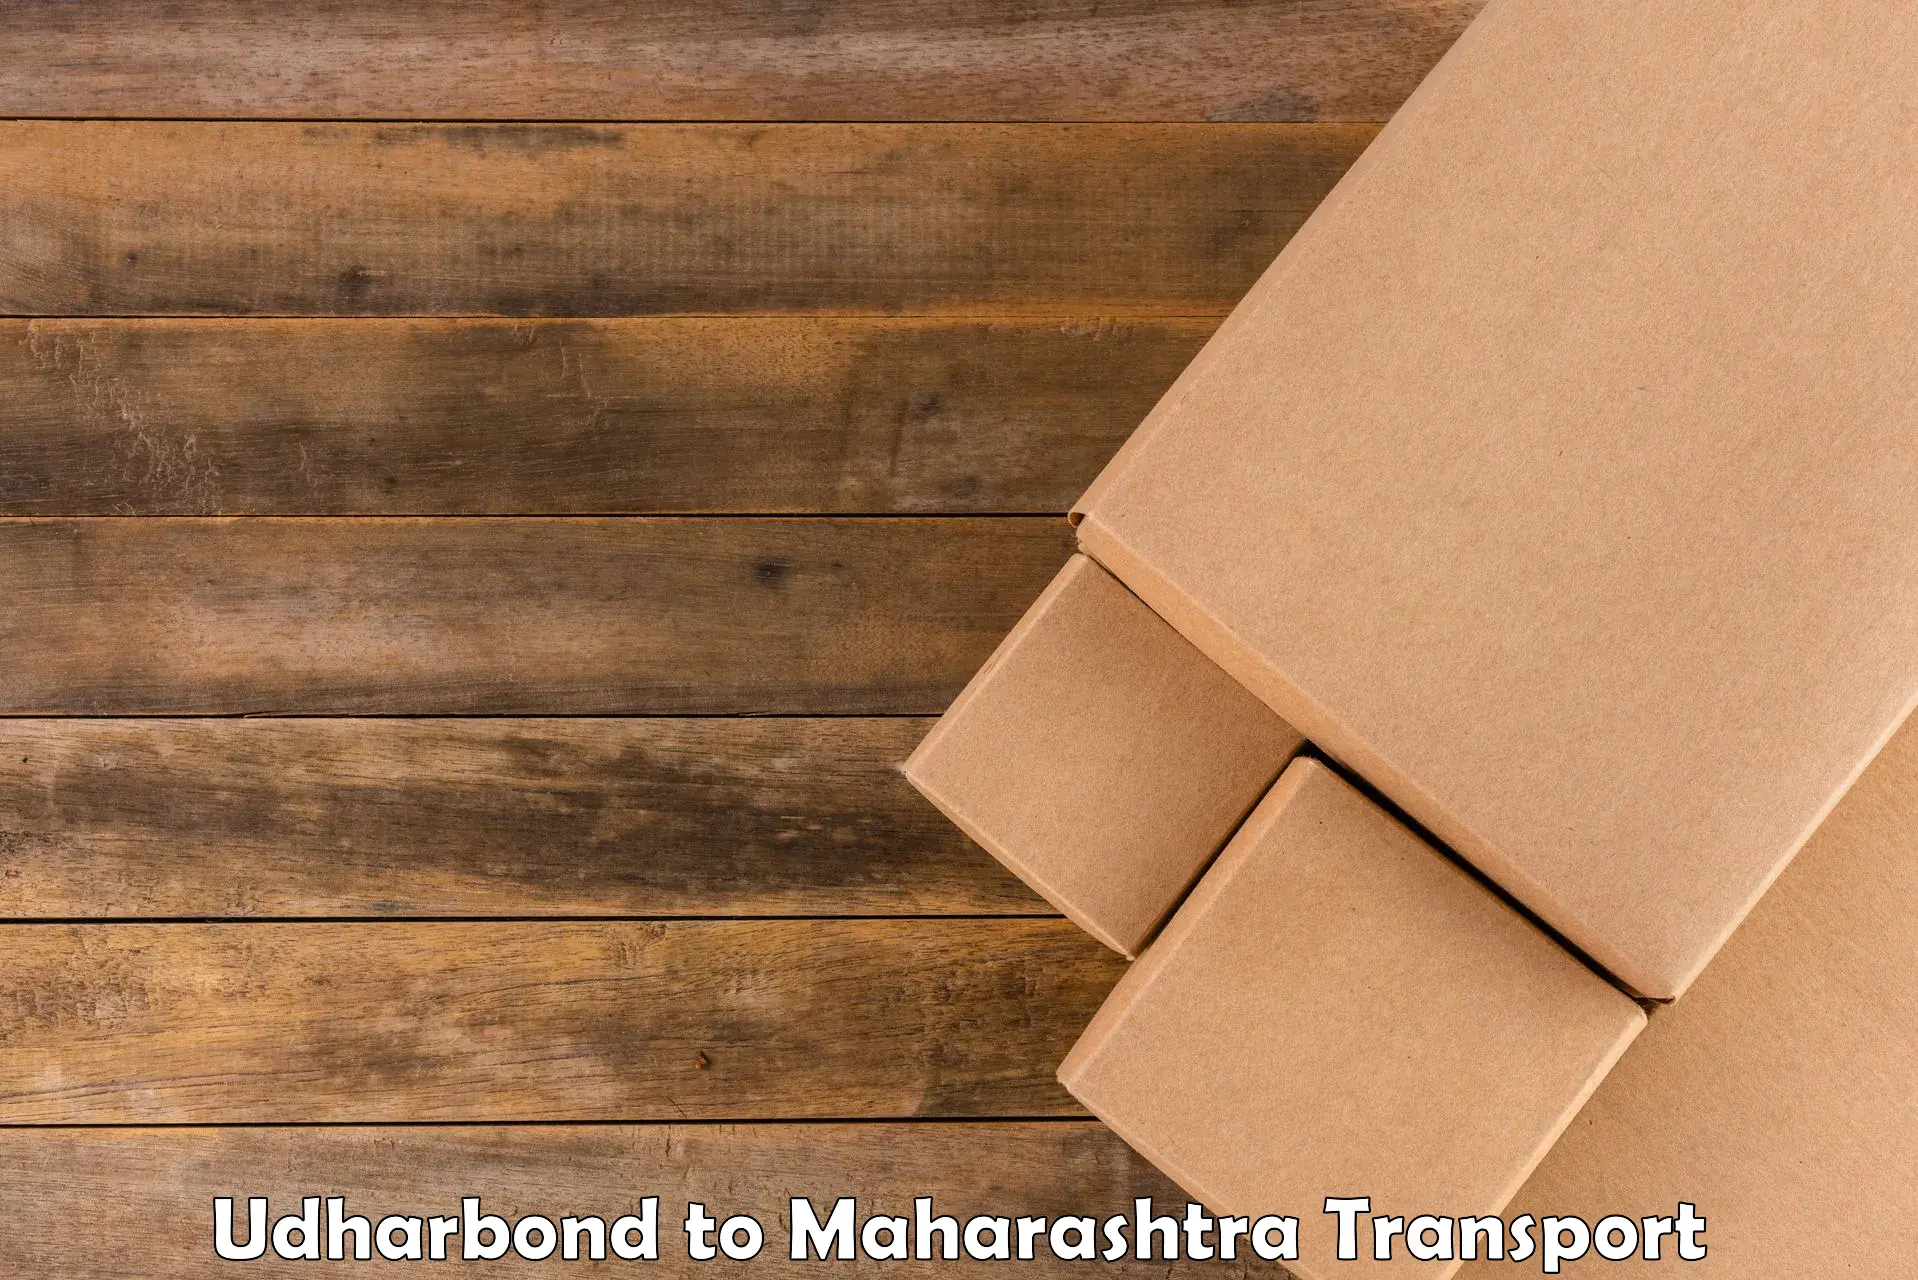 Domestic goods transportation services in Udharbond to Navi Mumbai